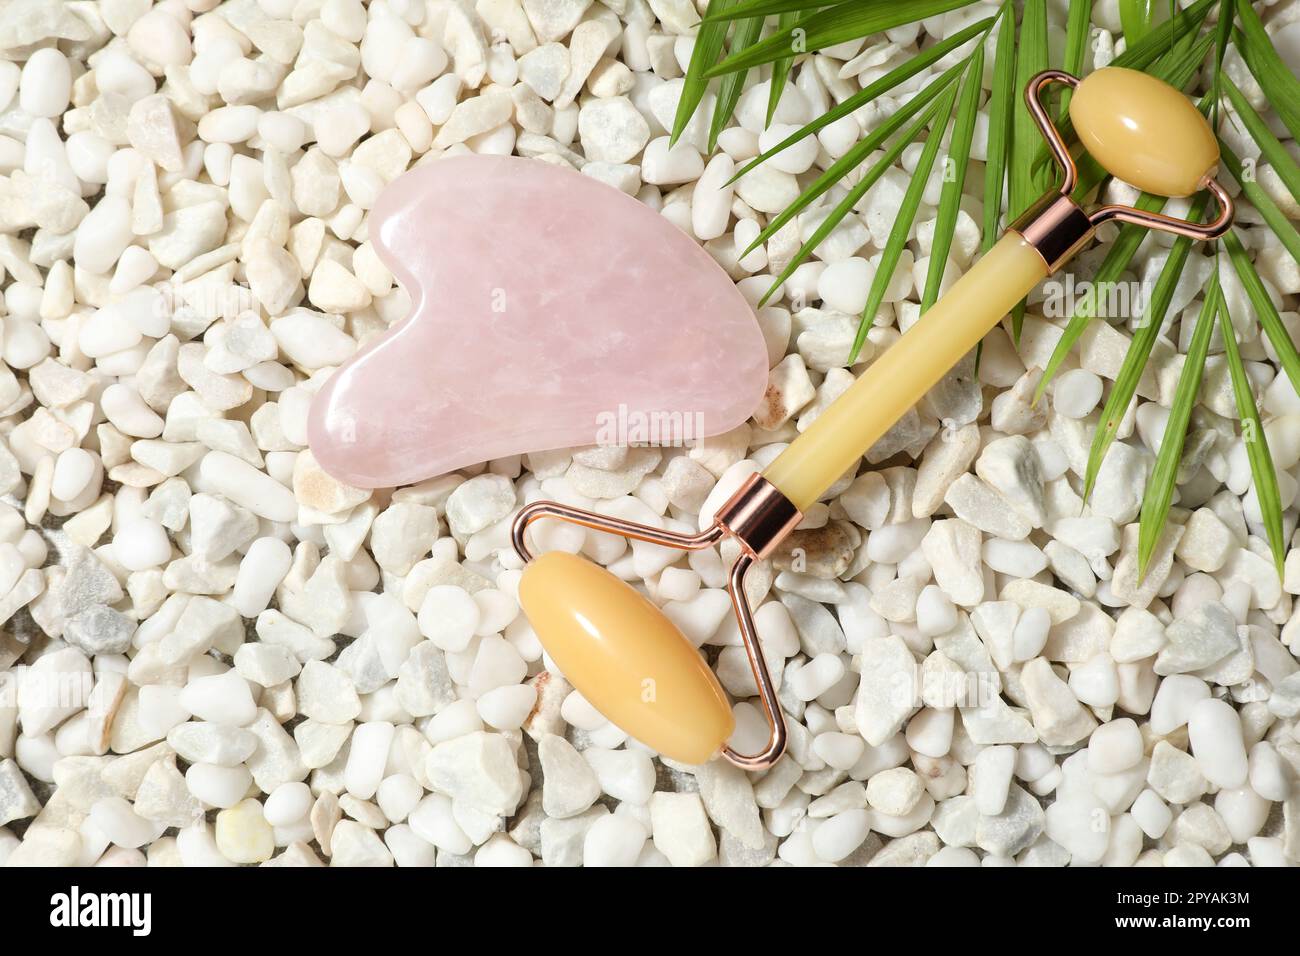 Quartz gua sha tool, face roller and green leaves on white stones, flat lay Stock Photo